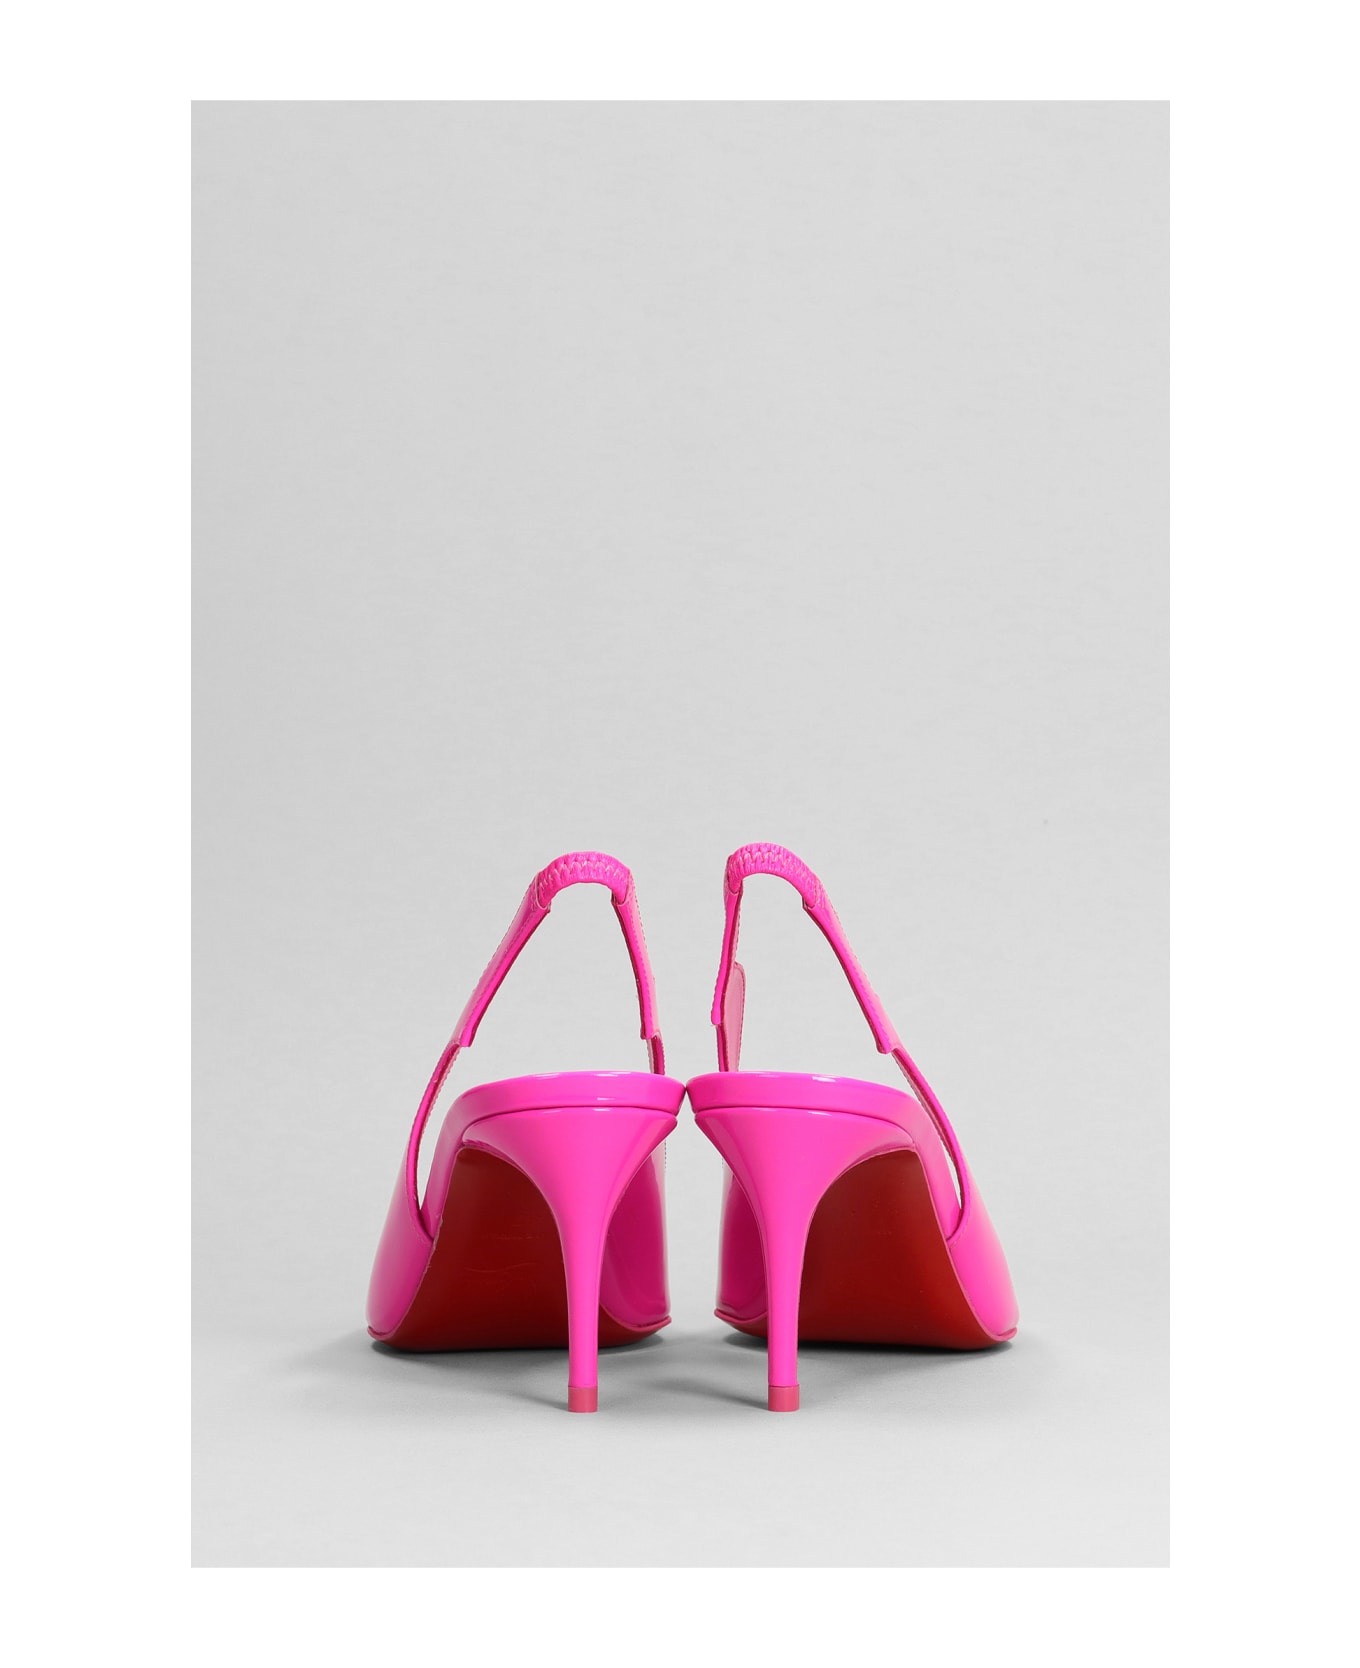 Christian Louboutin Hot Chick Sling Pumps In Rose-pink Patent Leather - rose-pink